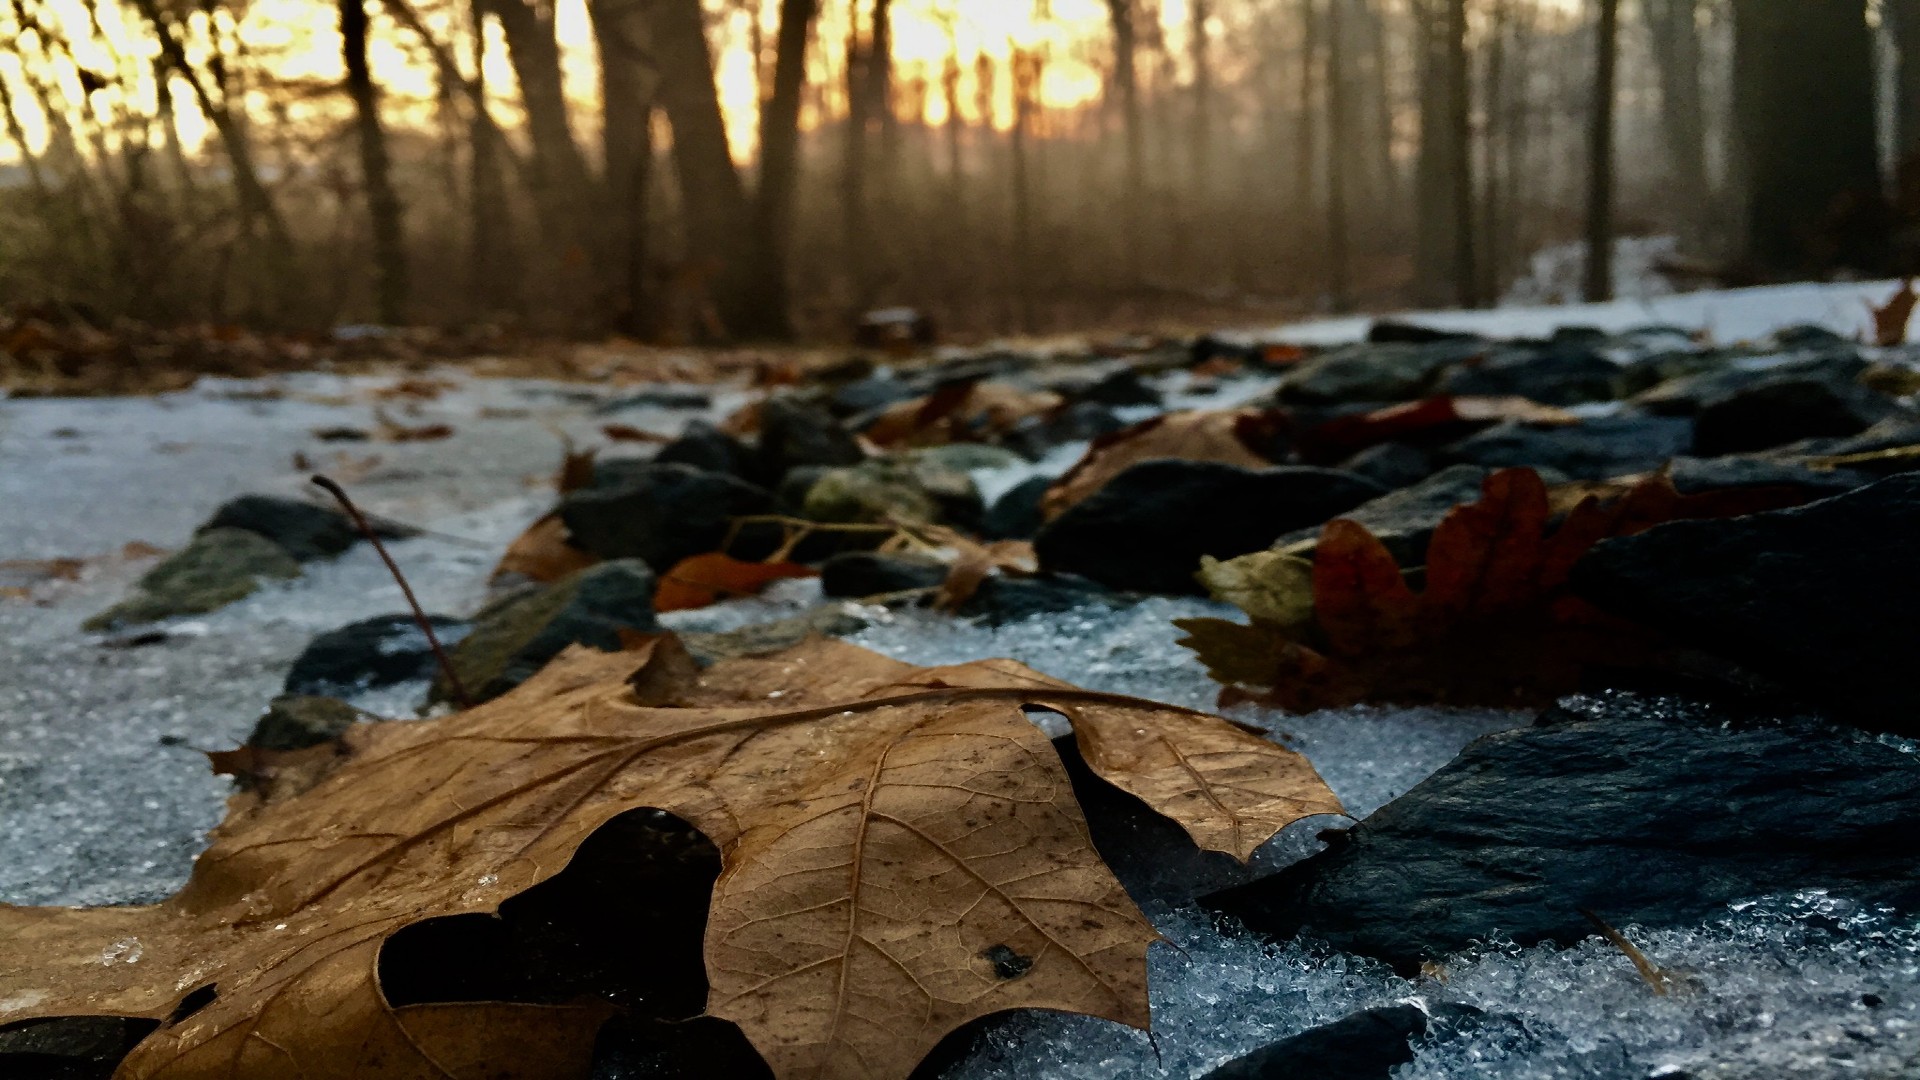 Maple leaf lying on the snowy, icy forest floor